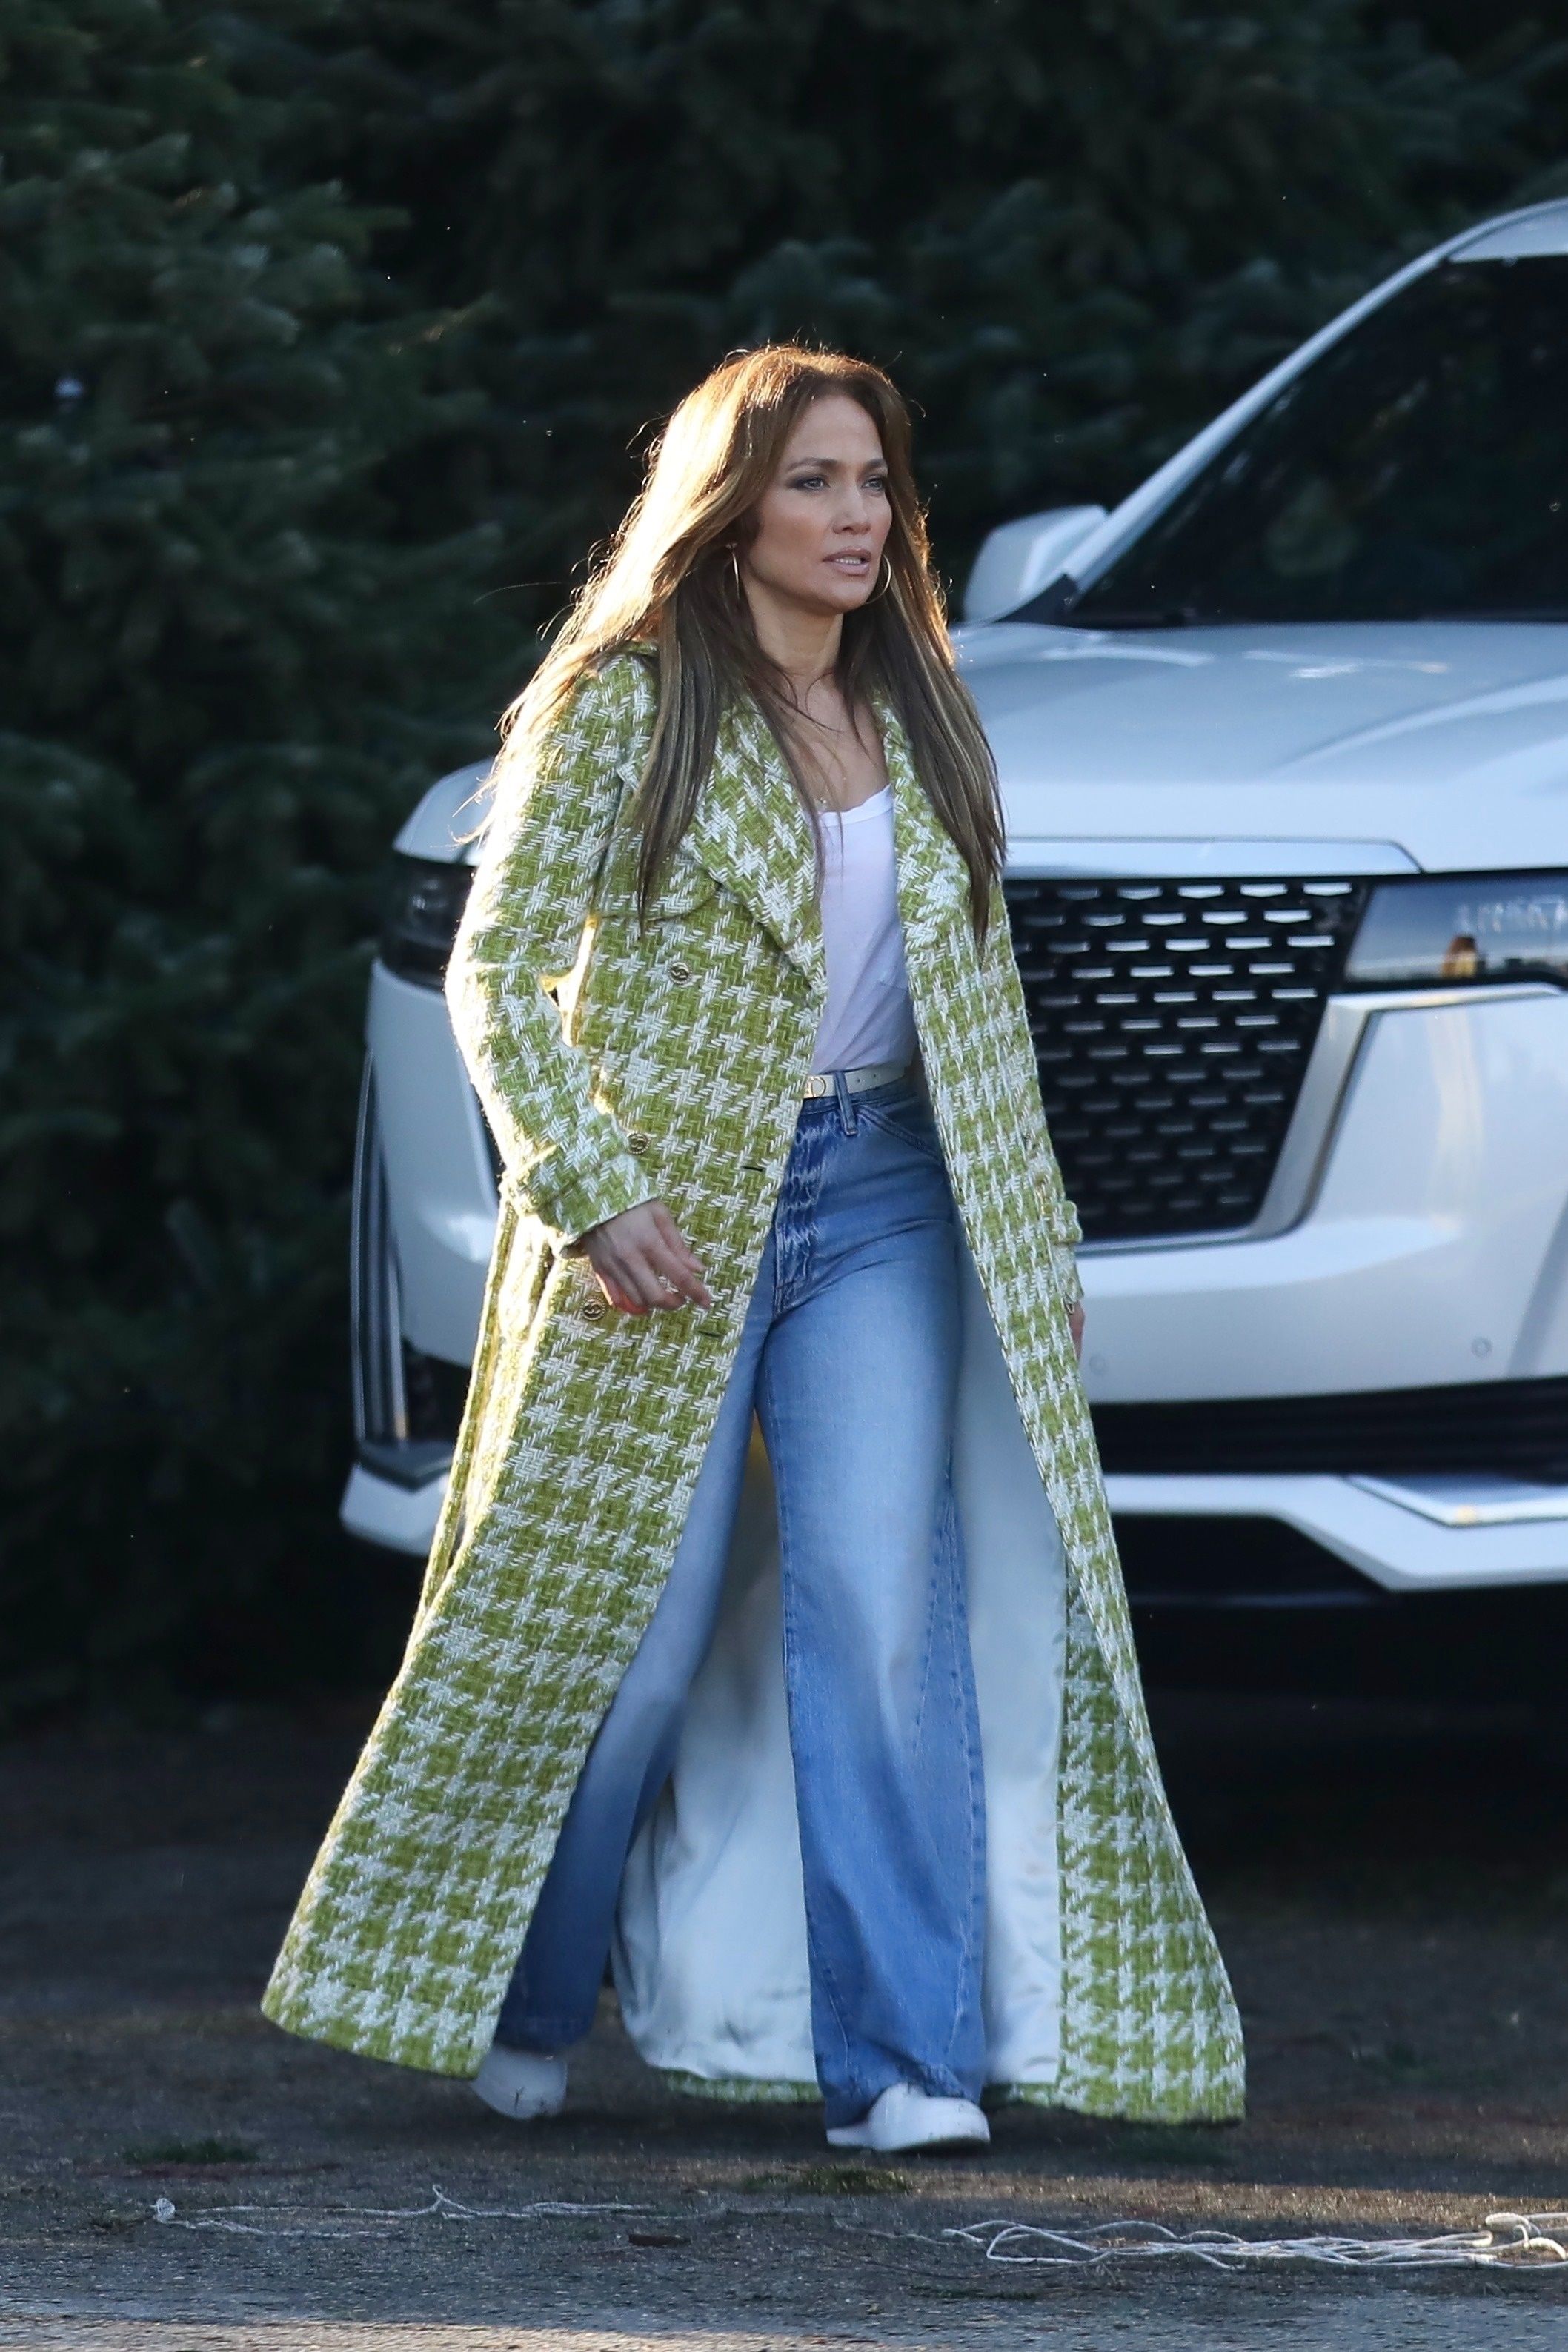 Jennifer Lopez Wears Lime Green Houndstooth Coat to Go Christmas